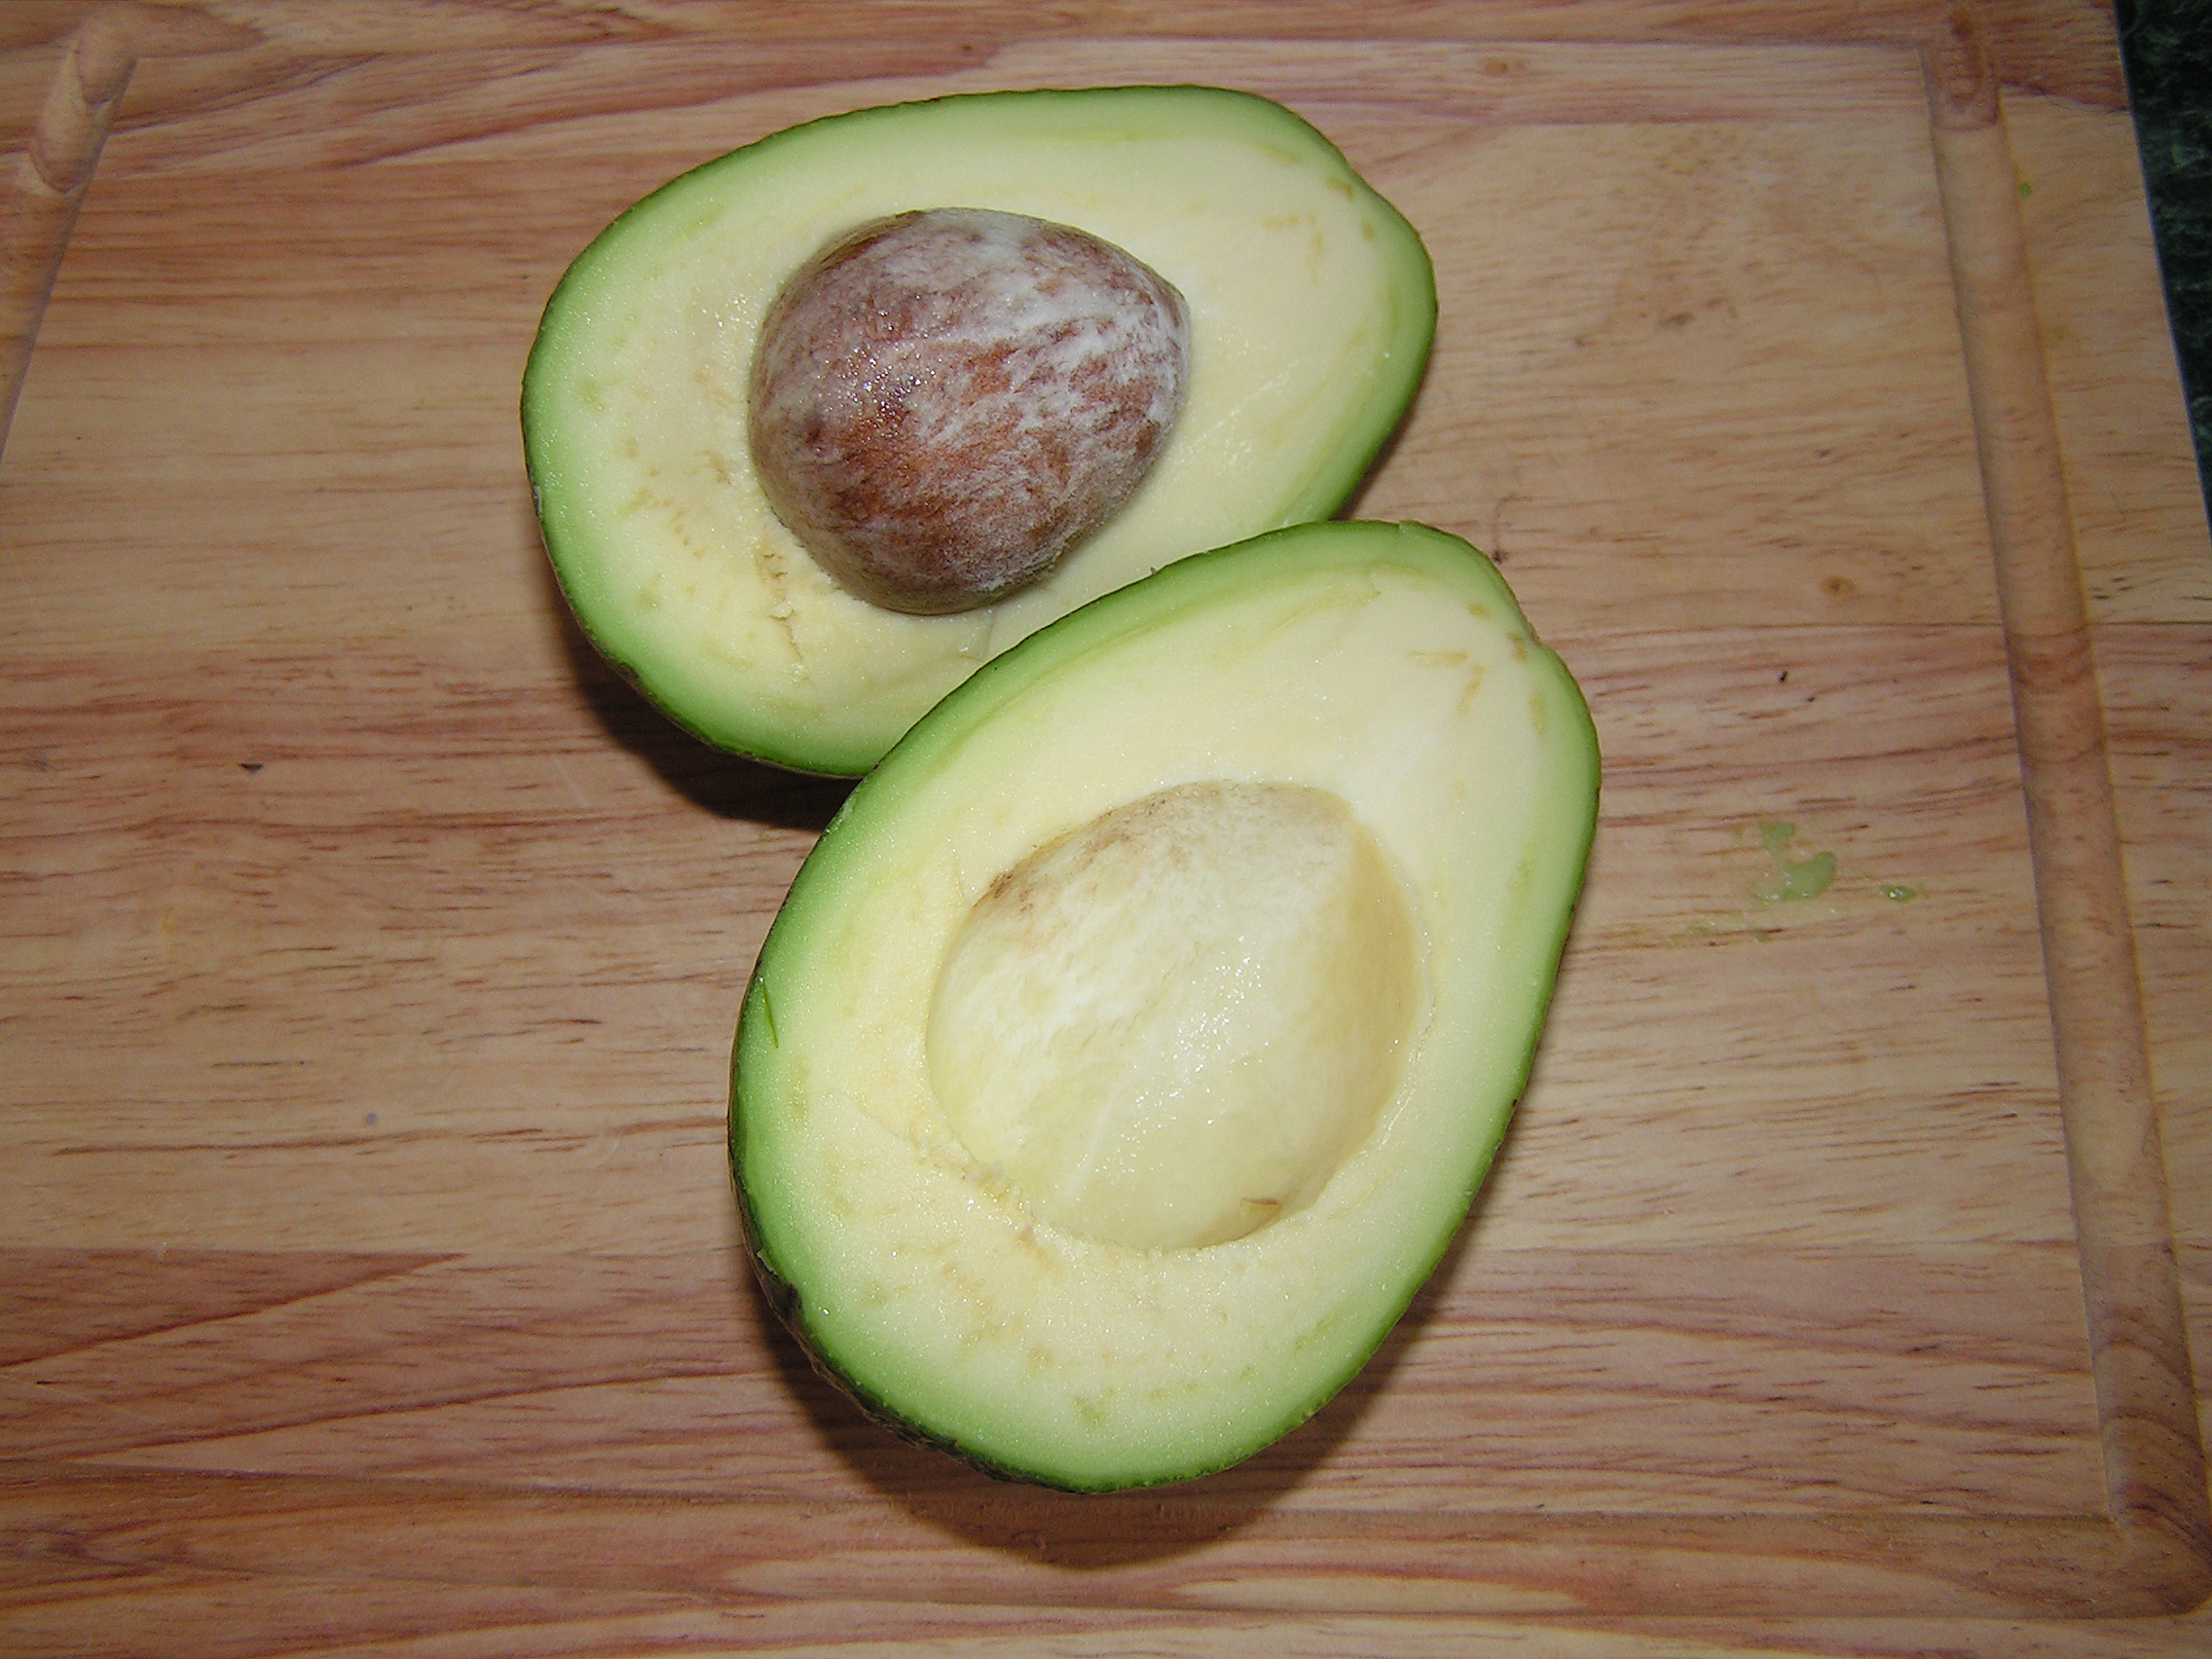 Avocados are rich in nutrients. (Photo courtesy of morguefile.com)